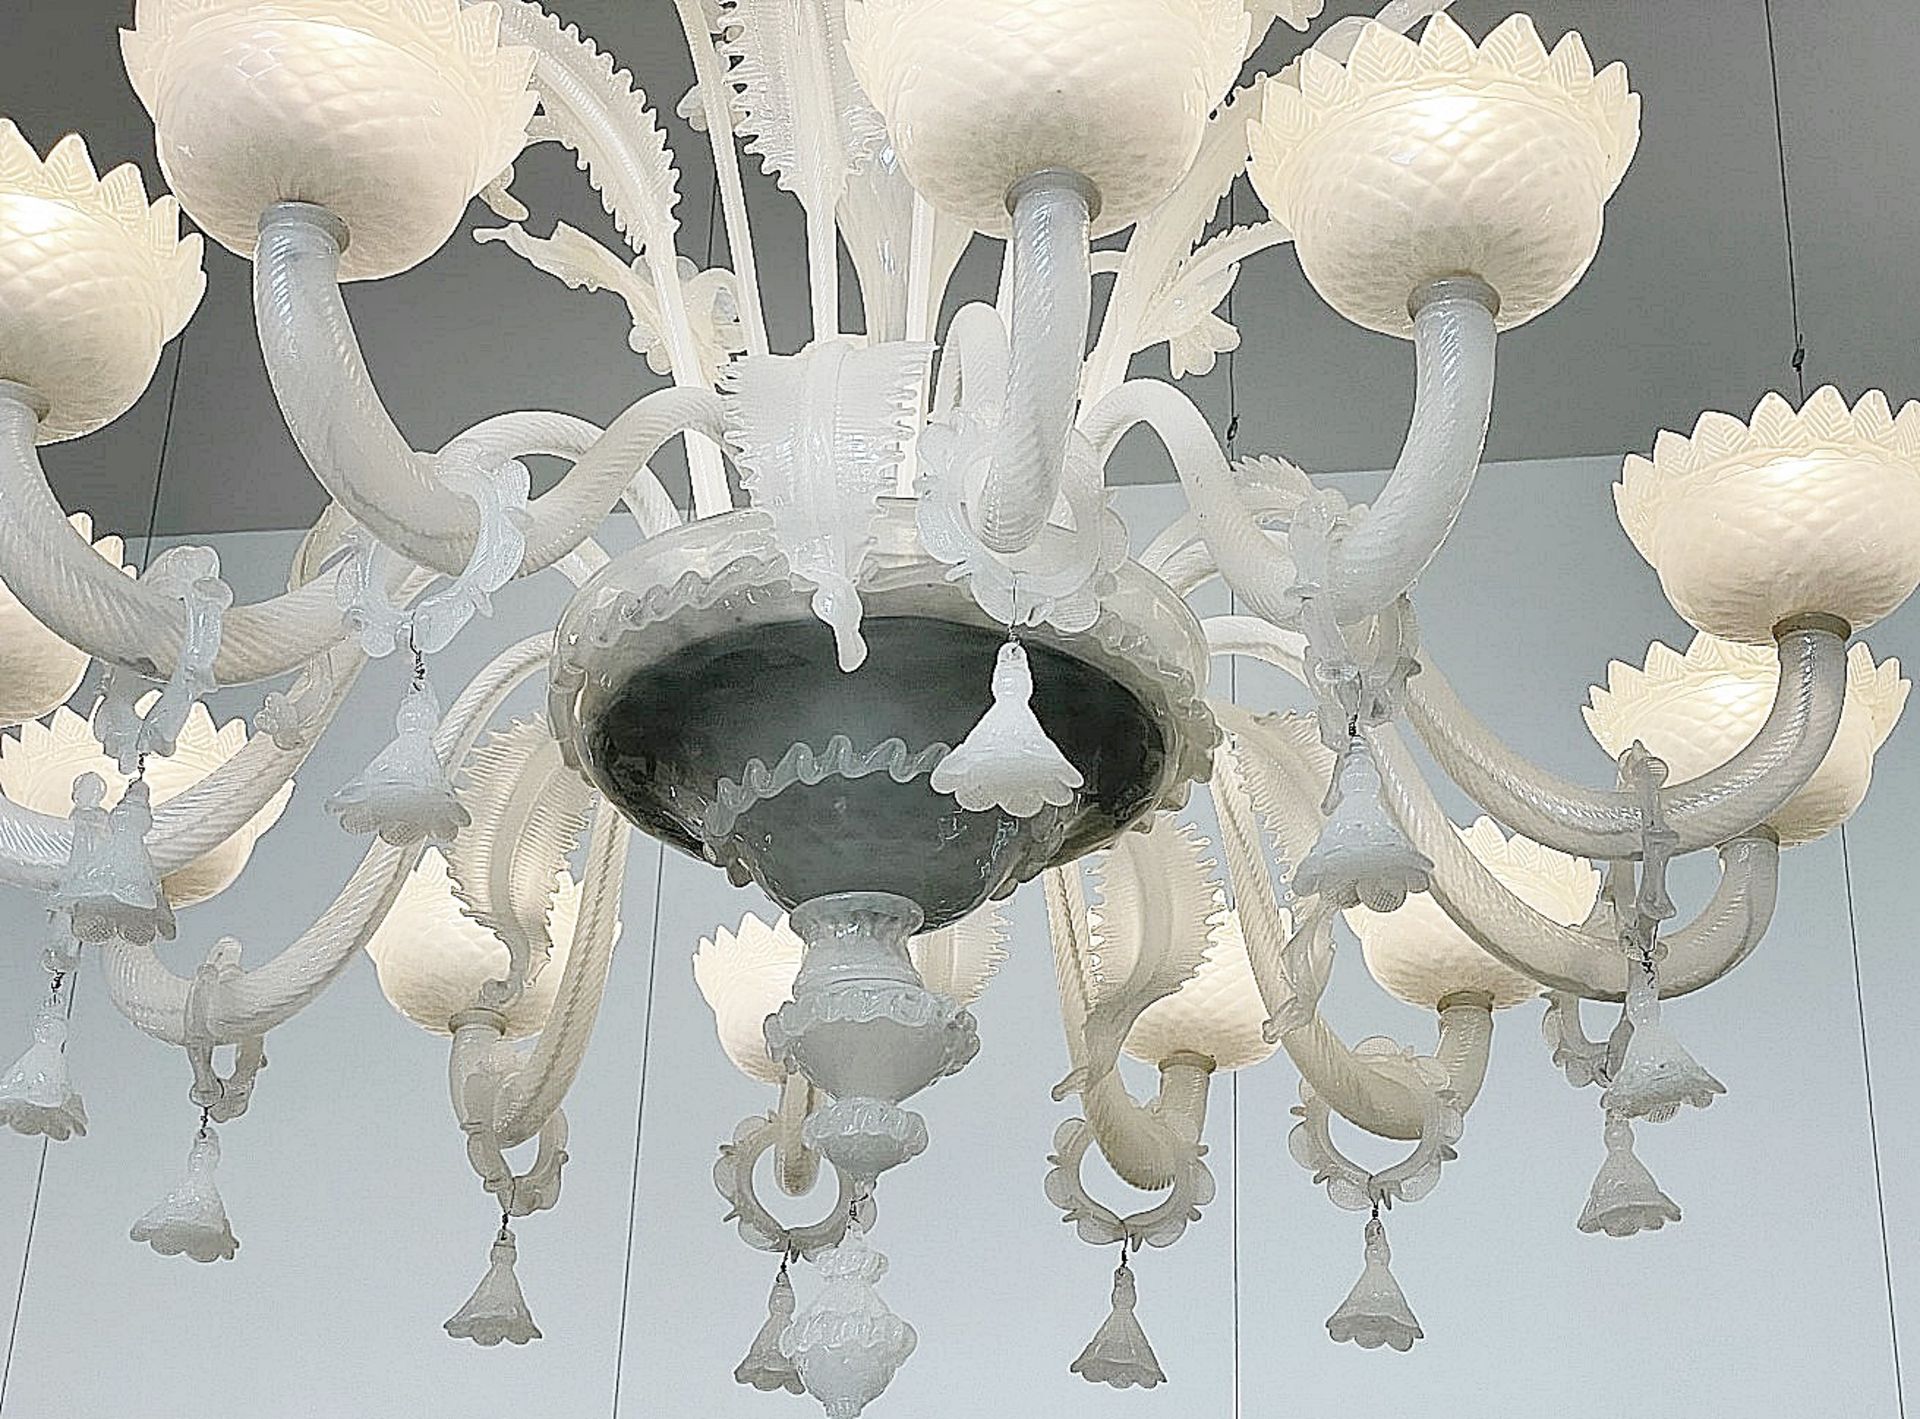 1 x Huge 1.8 Metre Tall Handcrafted 18-Arm Opal Glass Chandelier - Stunning Item - Ref: MHB137 - - Image 3 of 12